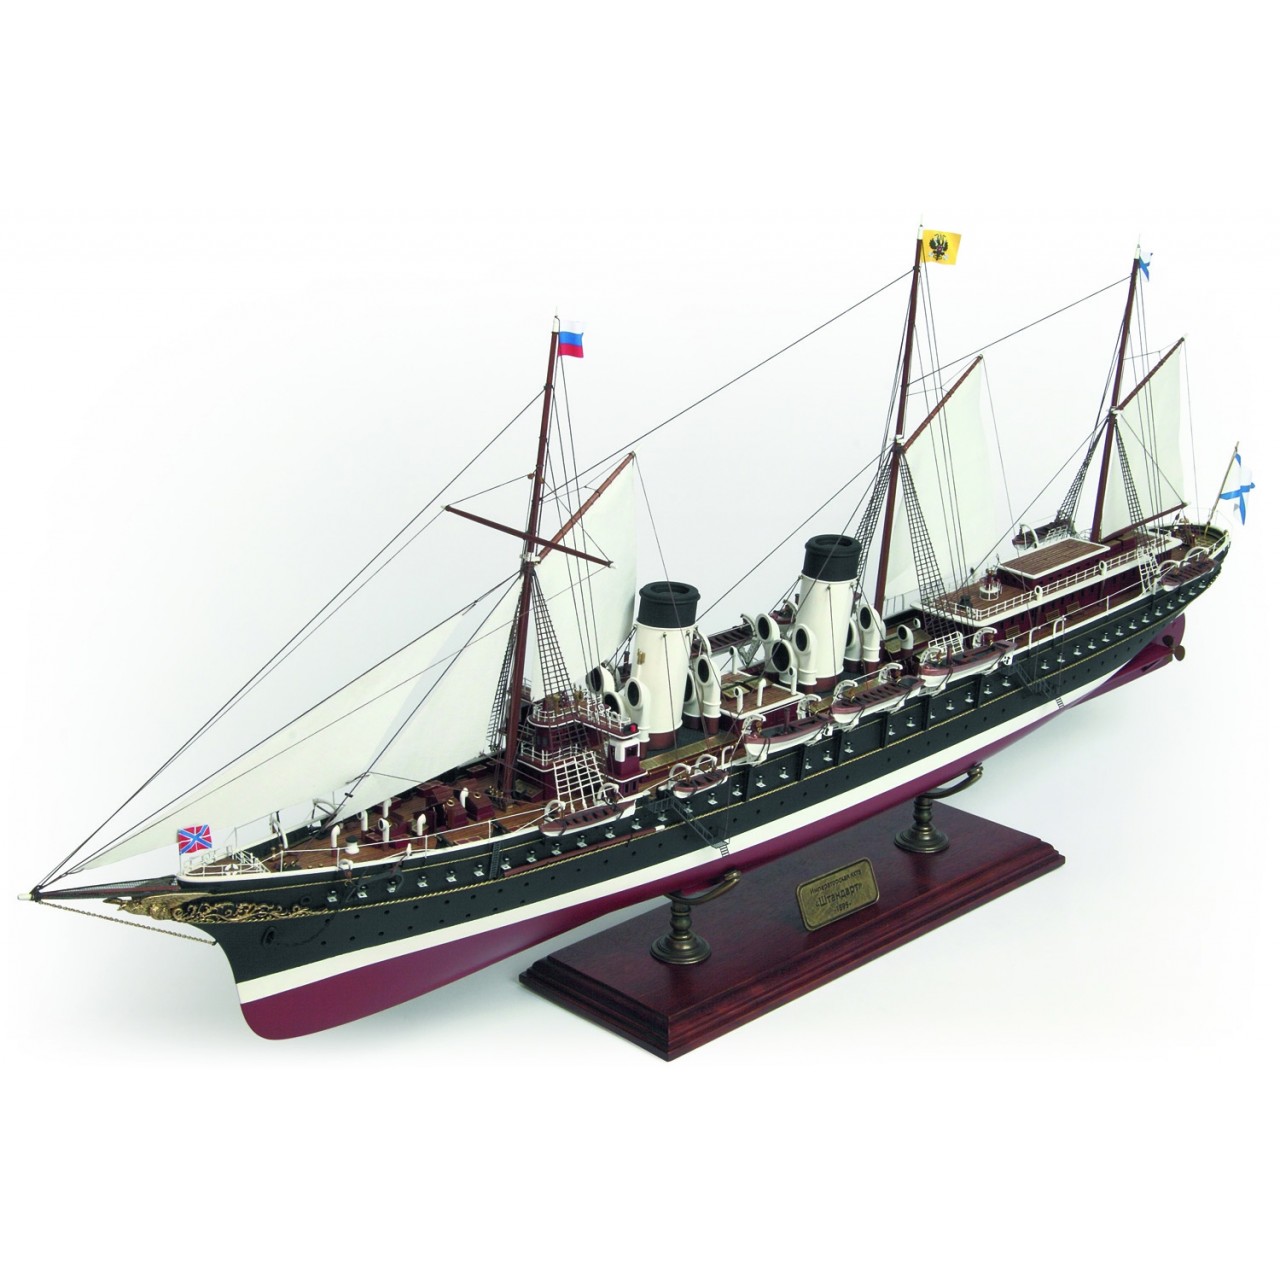 Build the Imperial Standart Model Yacht ModelSpace